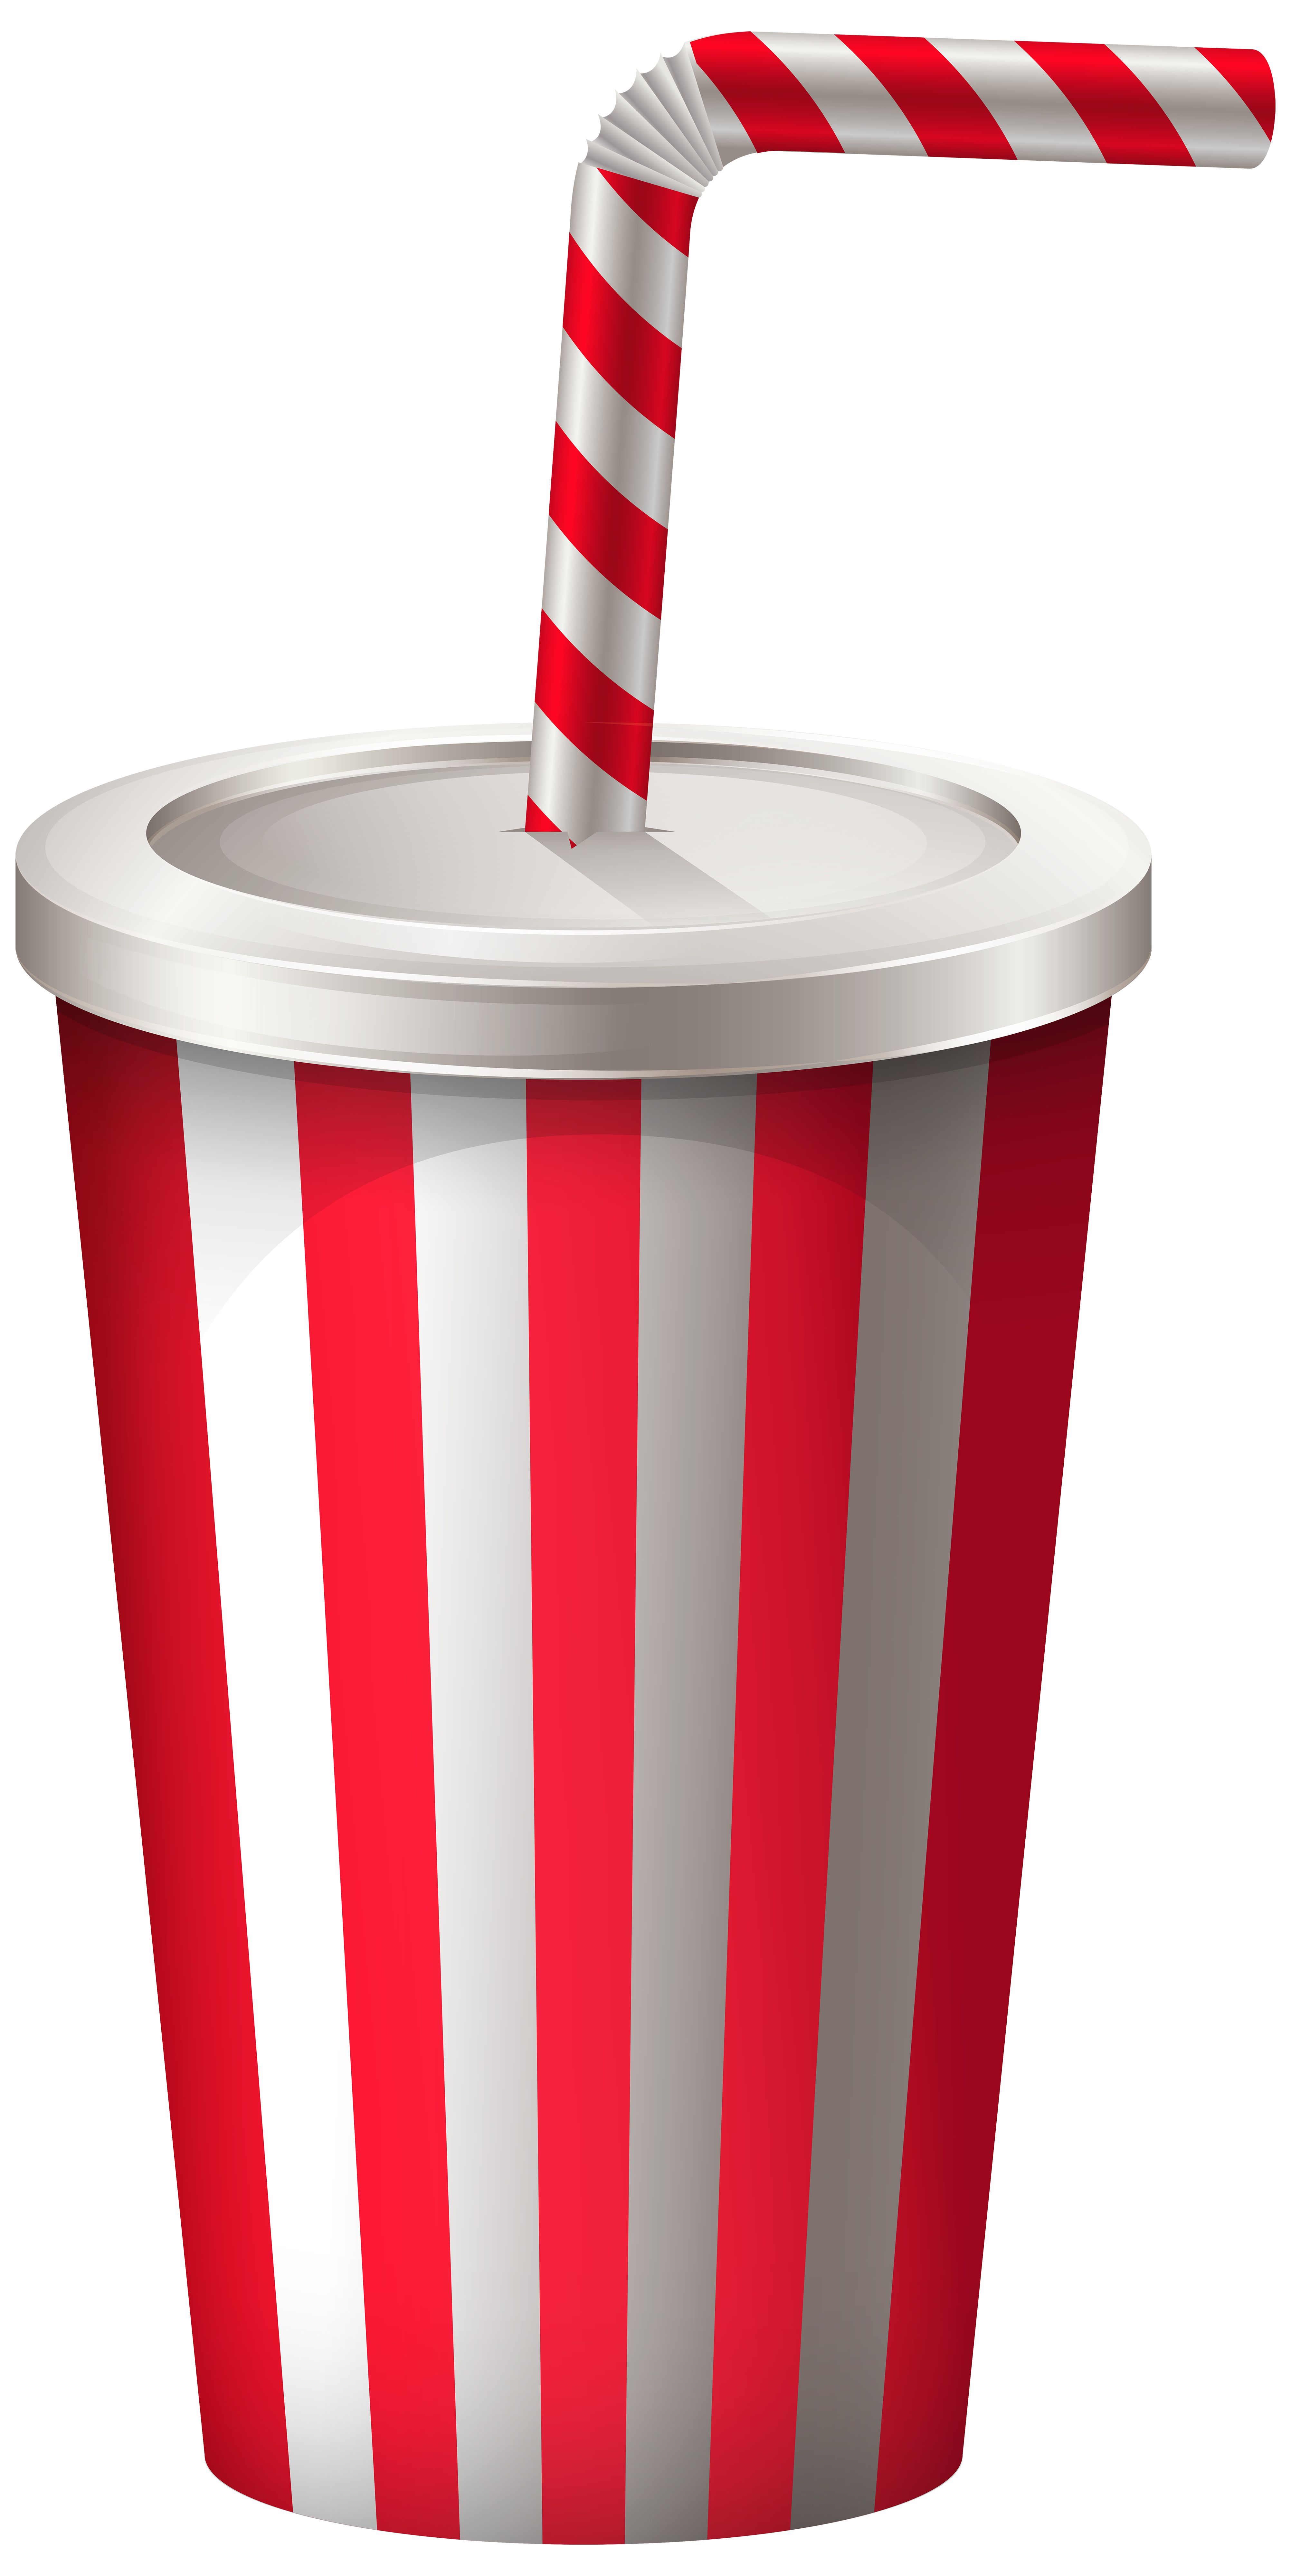 Drink Cup with Straw PNG Transparent Clip Art Image